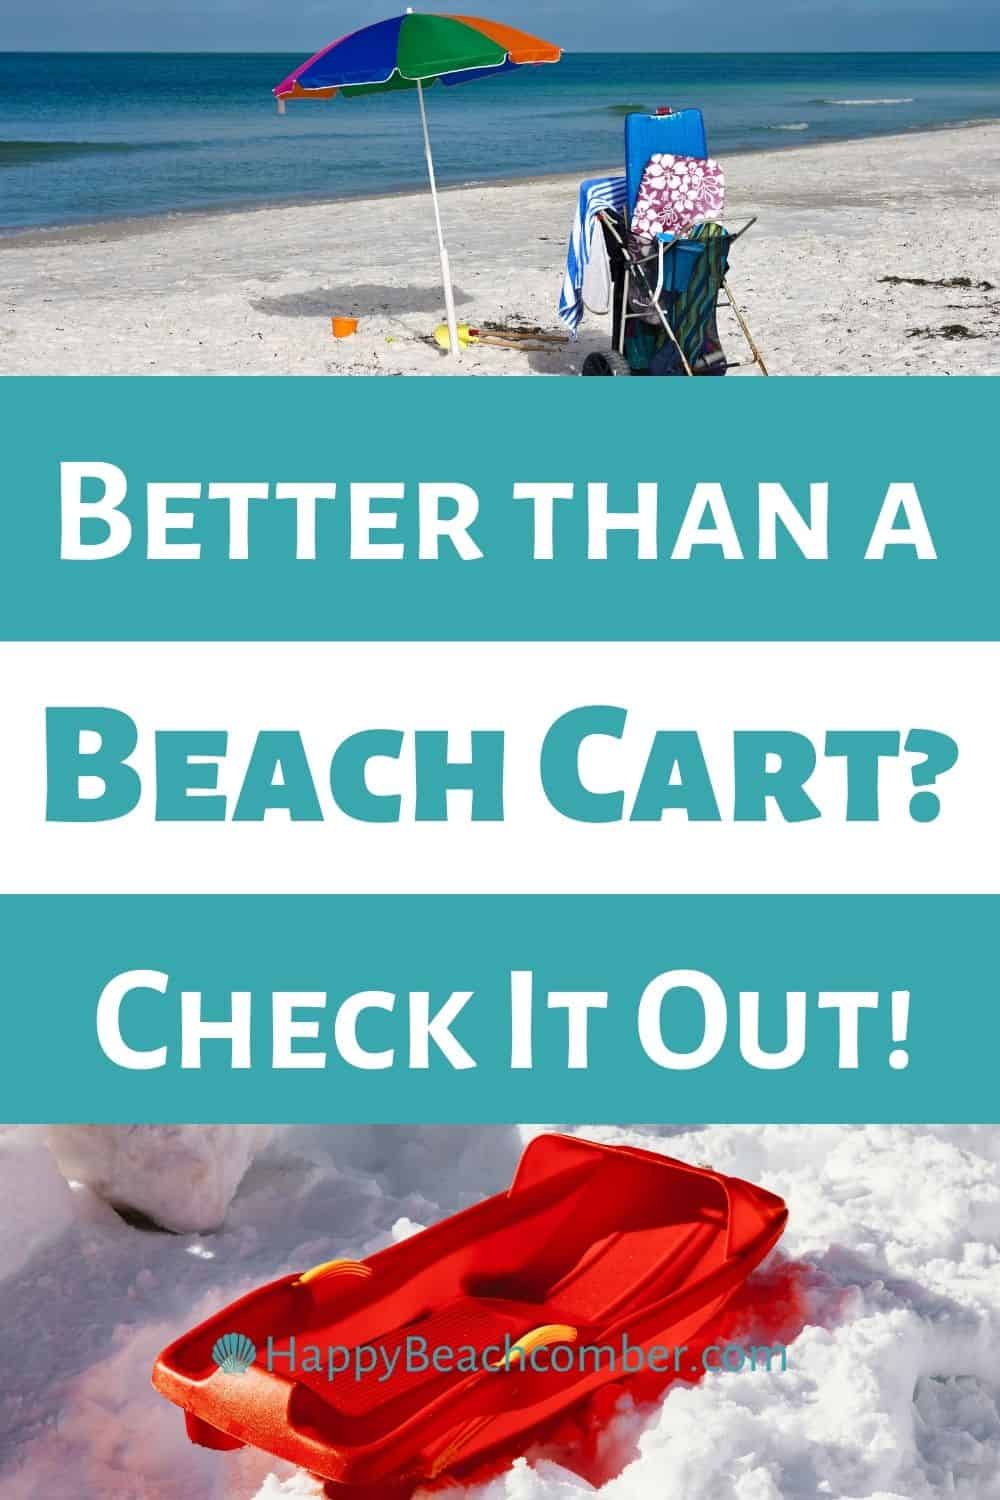 Better than a cart? Check it out!